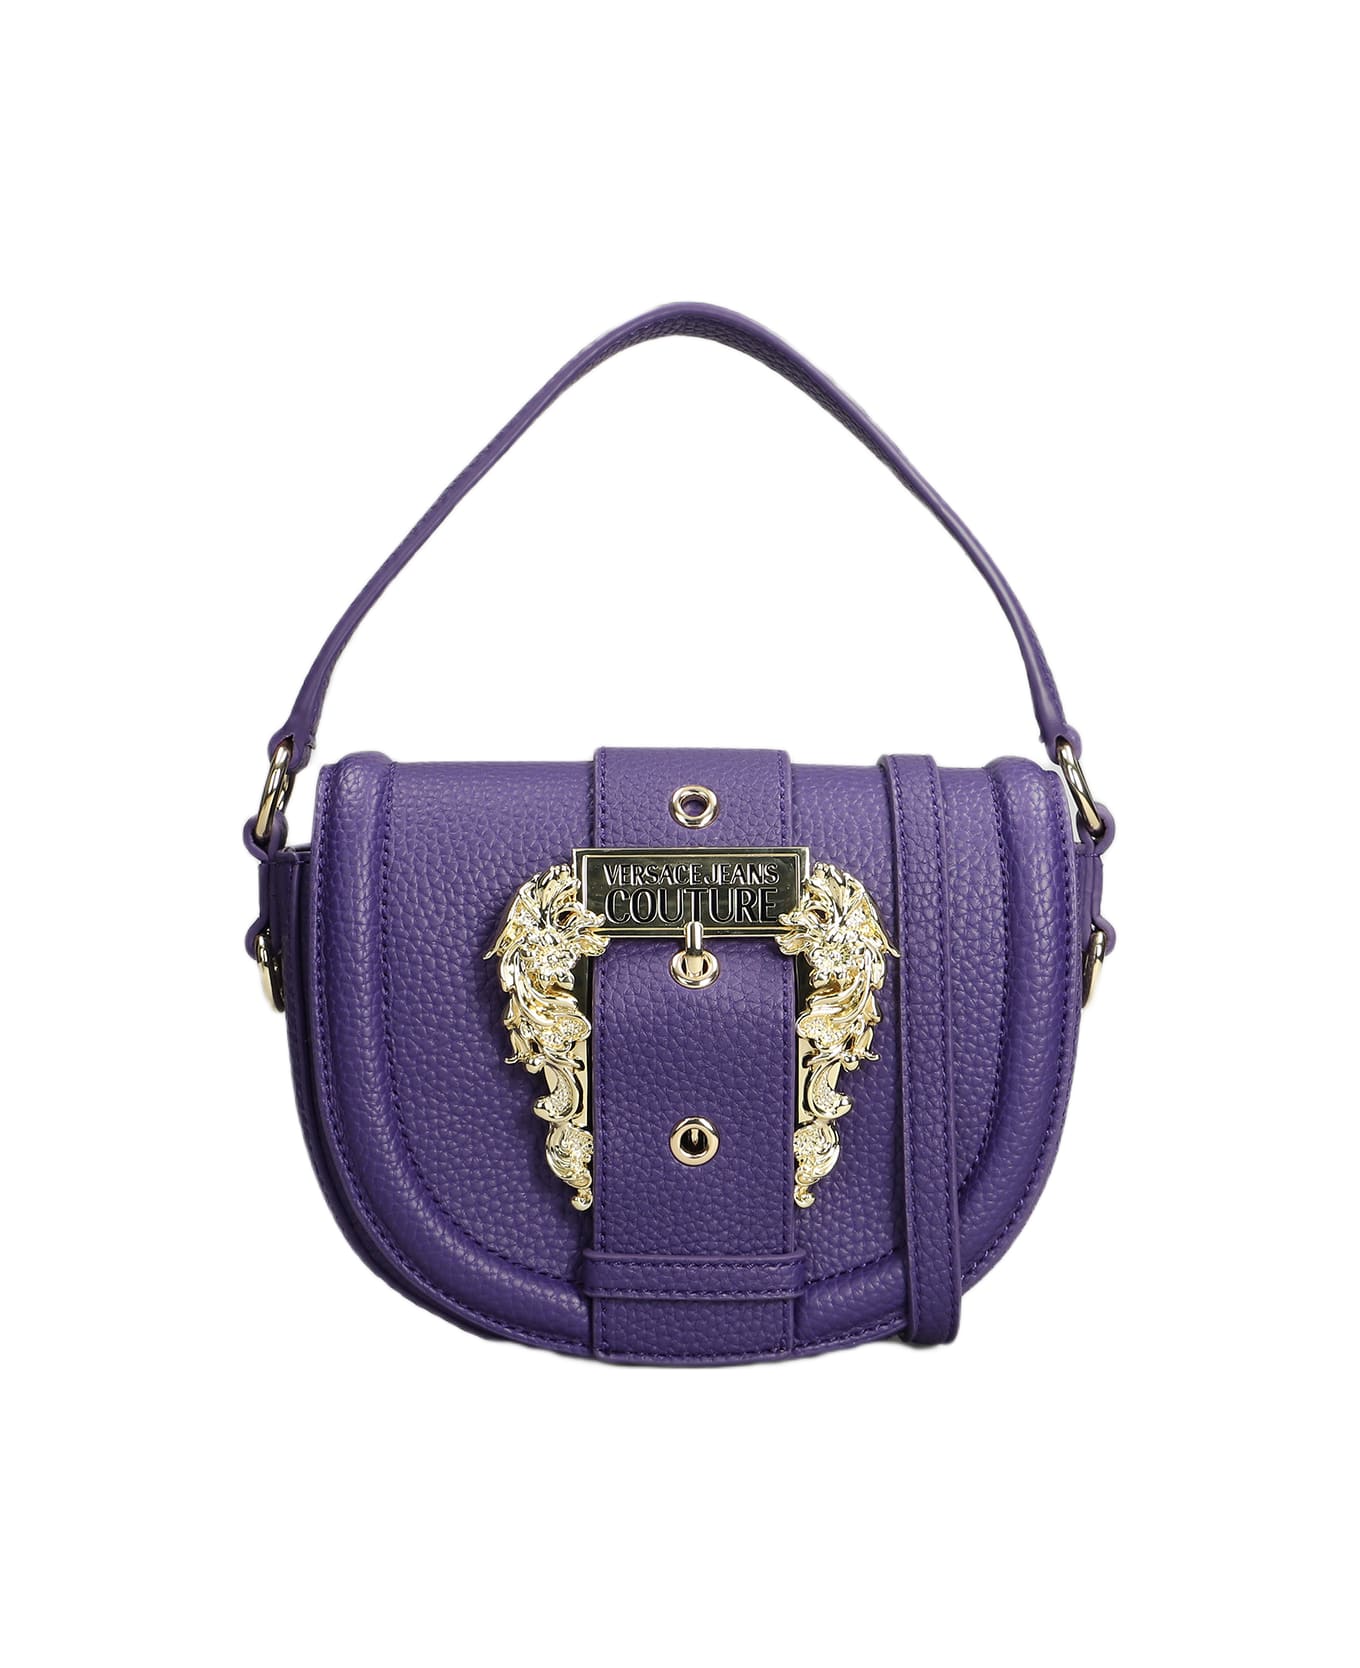 Versace Jeans Couture Hand Bag - PURPLE トートバッグ